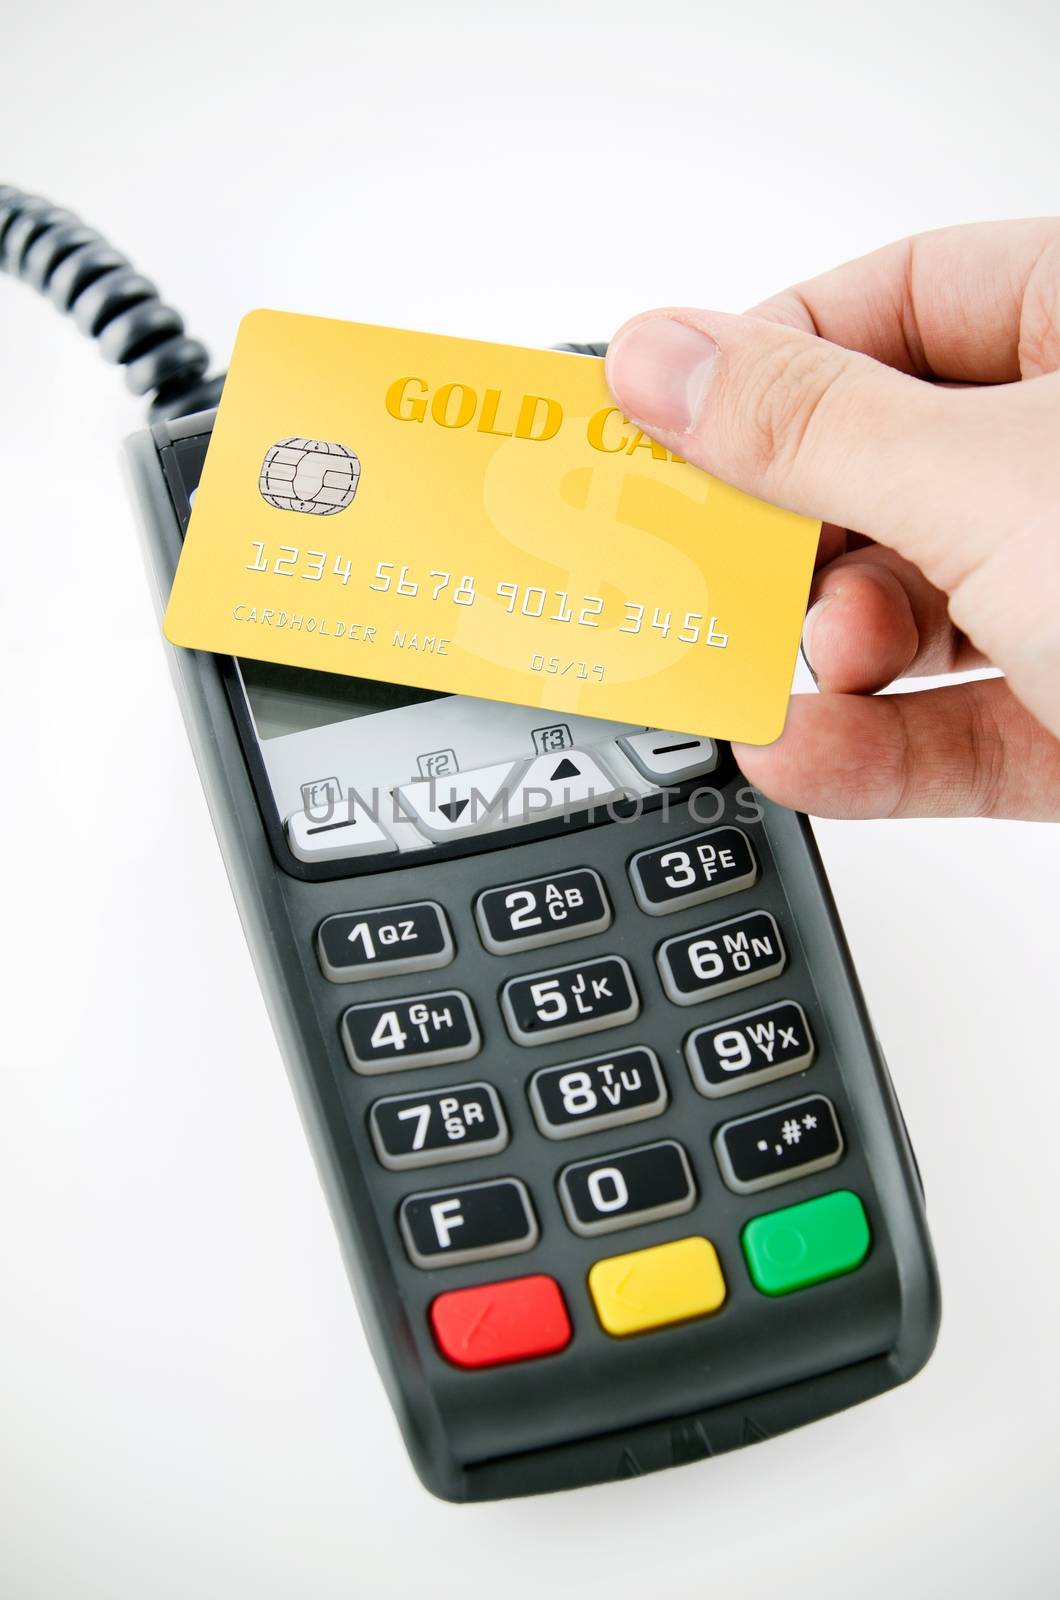 Contactless gold payment card with NFC chip using with terminal device